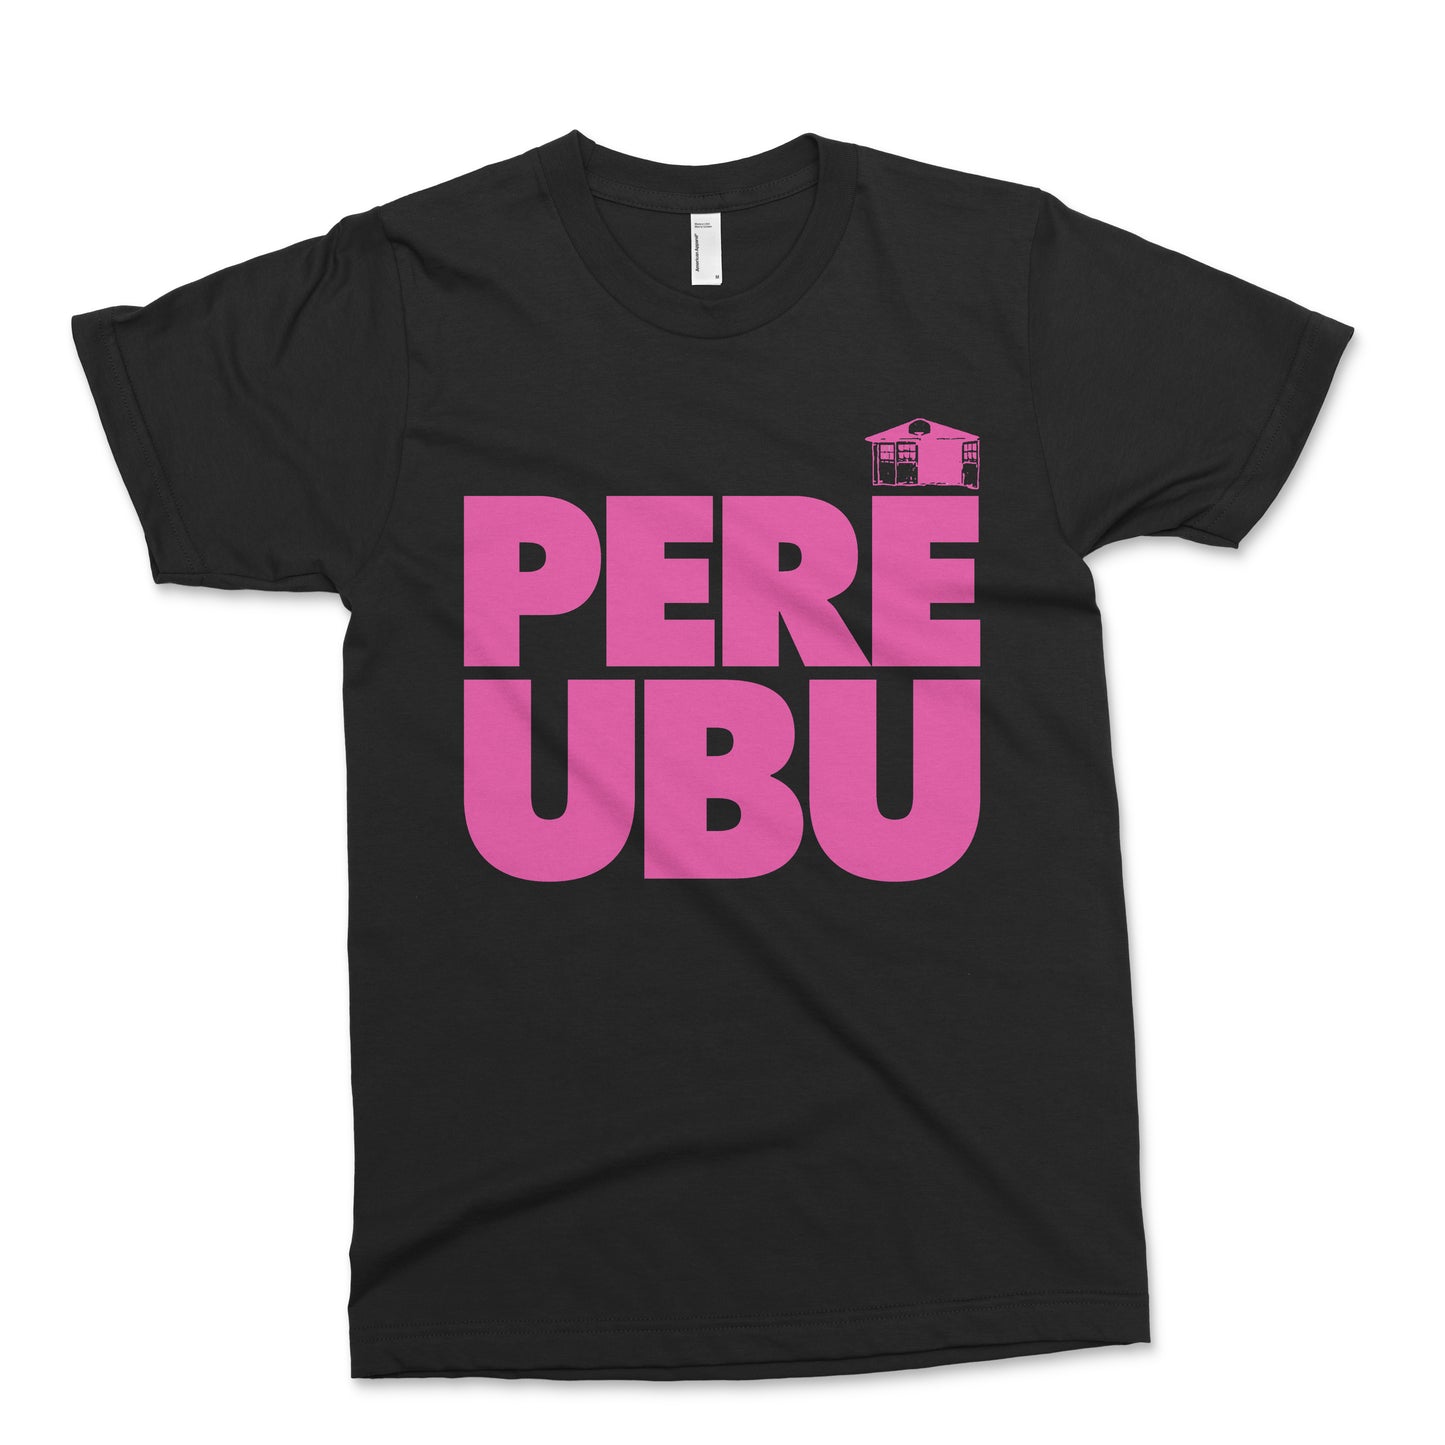 Pere Ubu - Classic T in Black with Pink Lettering